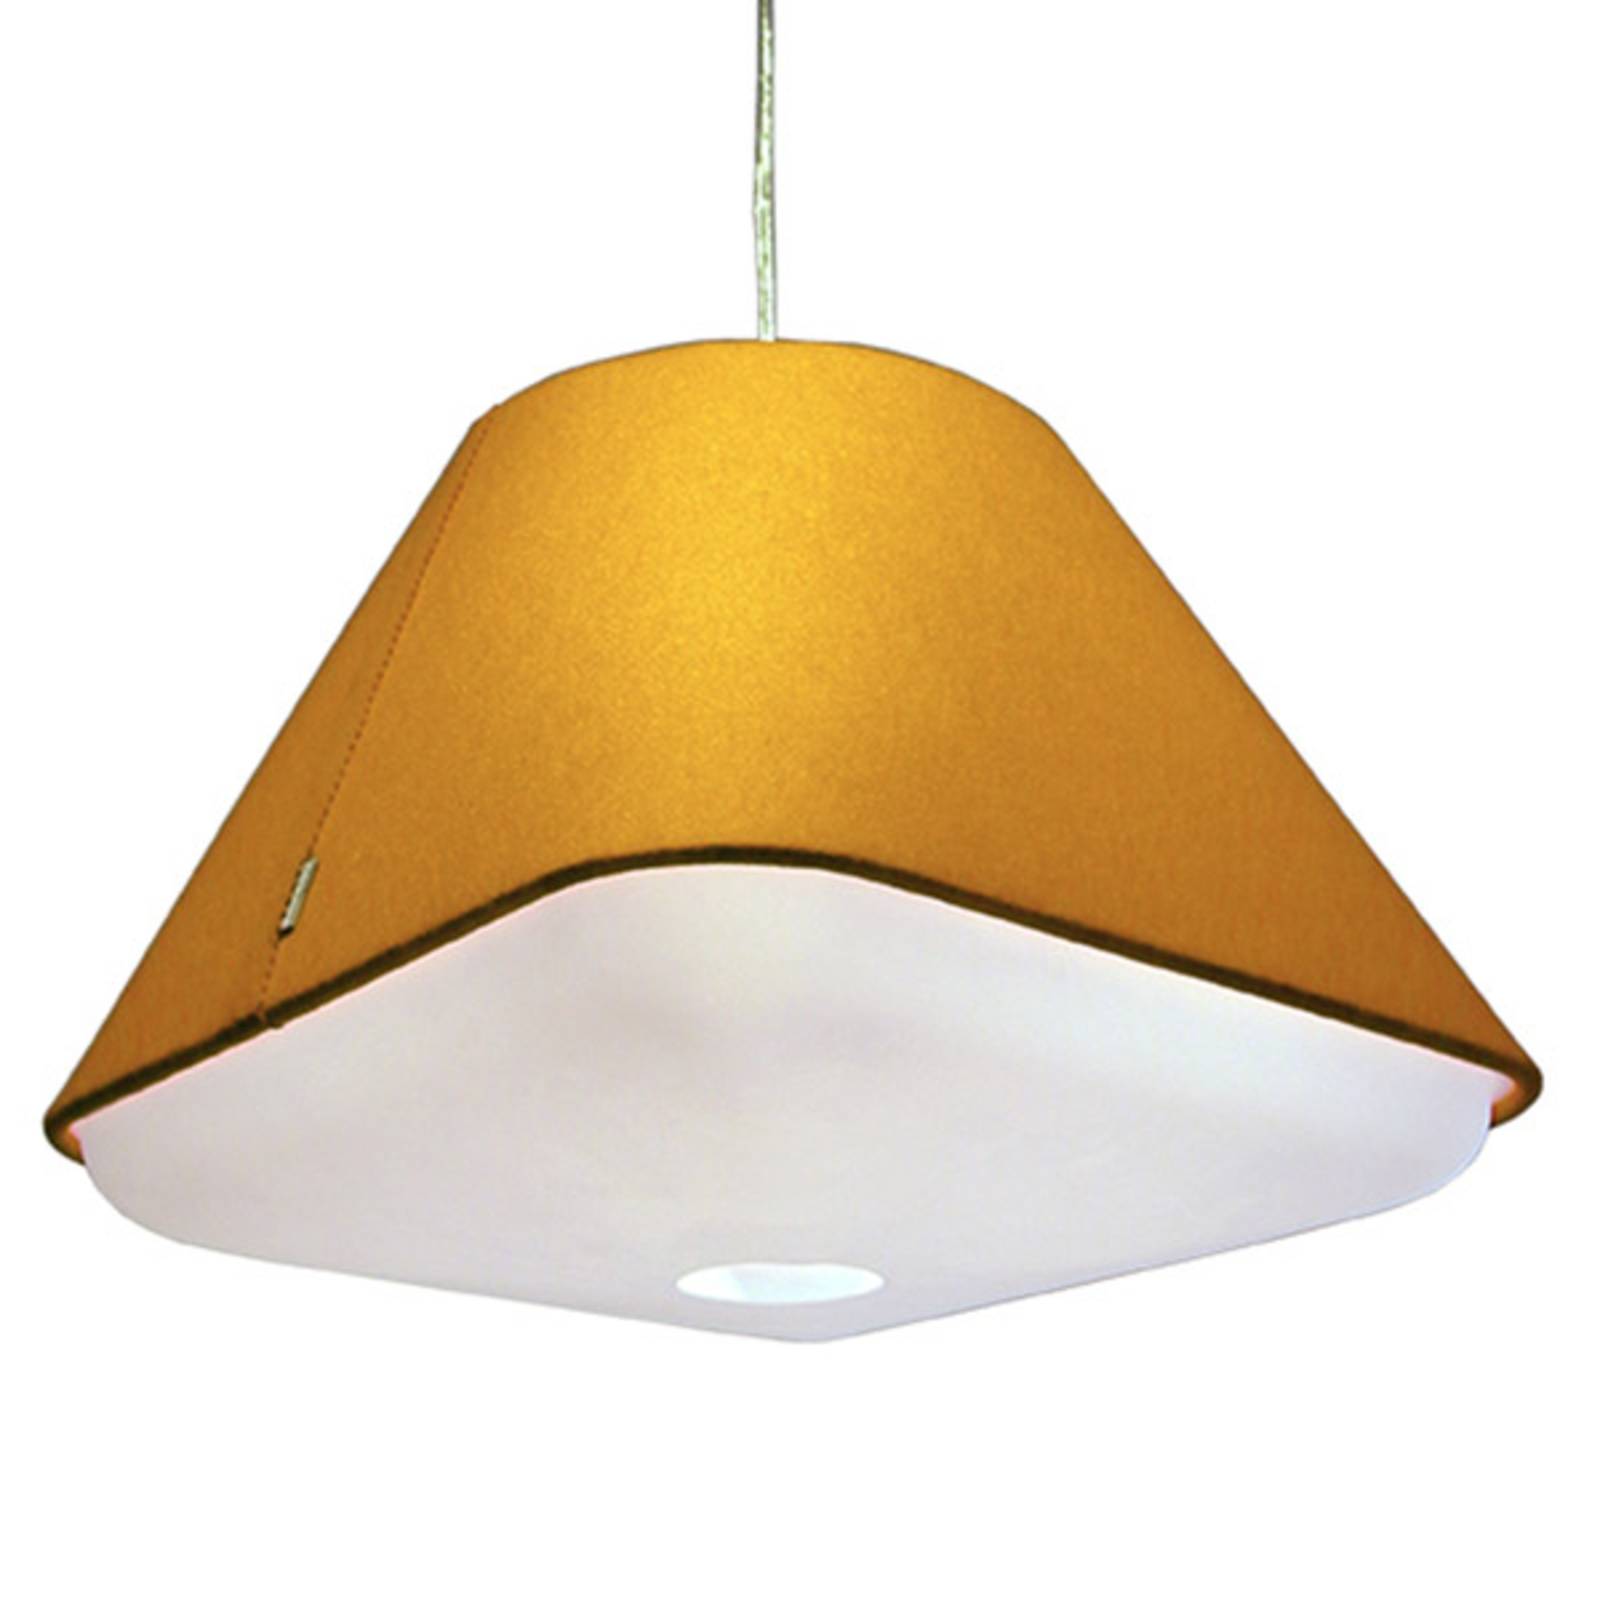 Innermost RD2SQ 40 - suspension couleur ocre